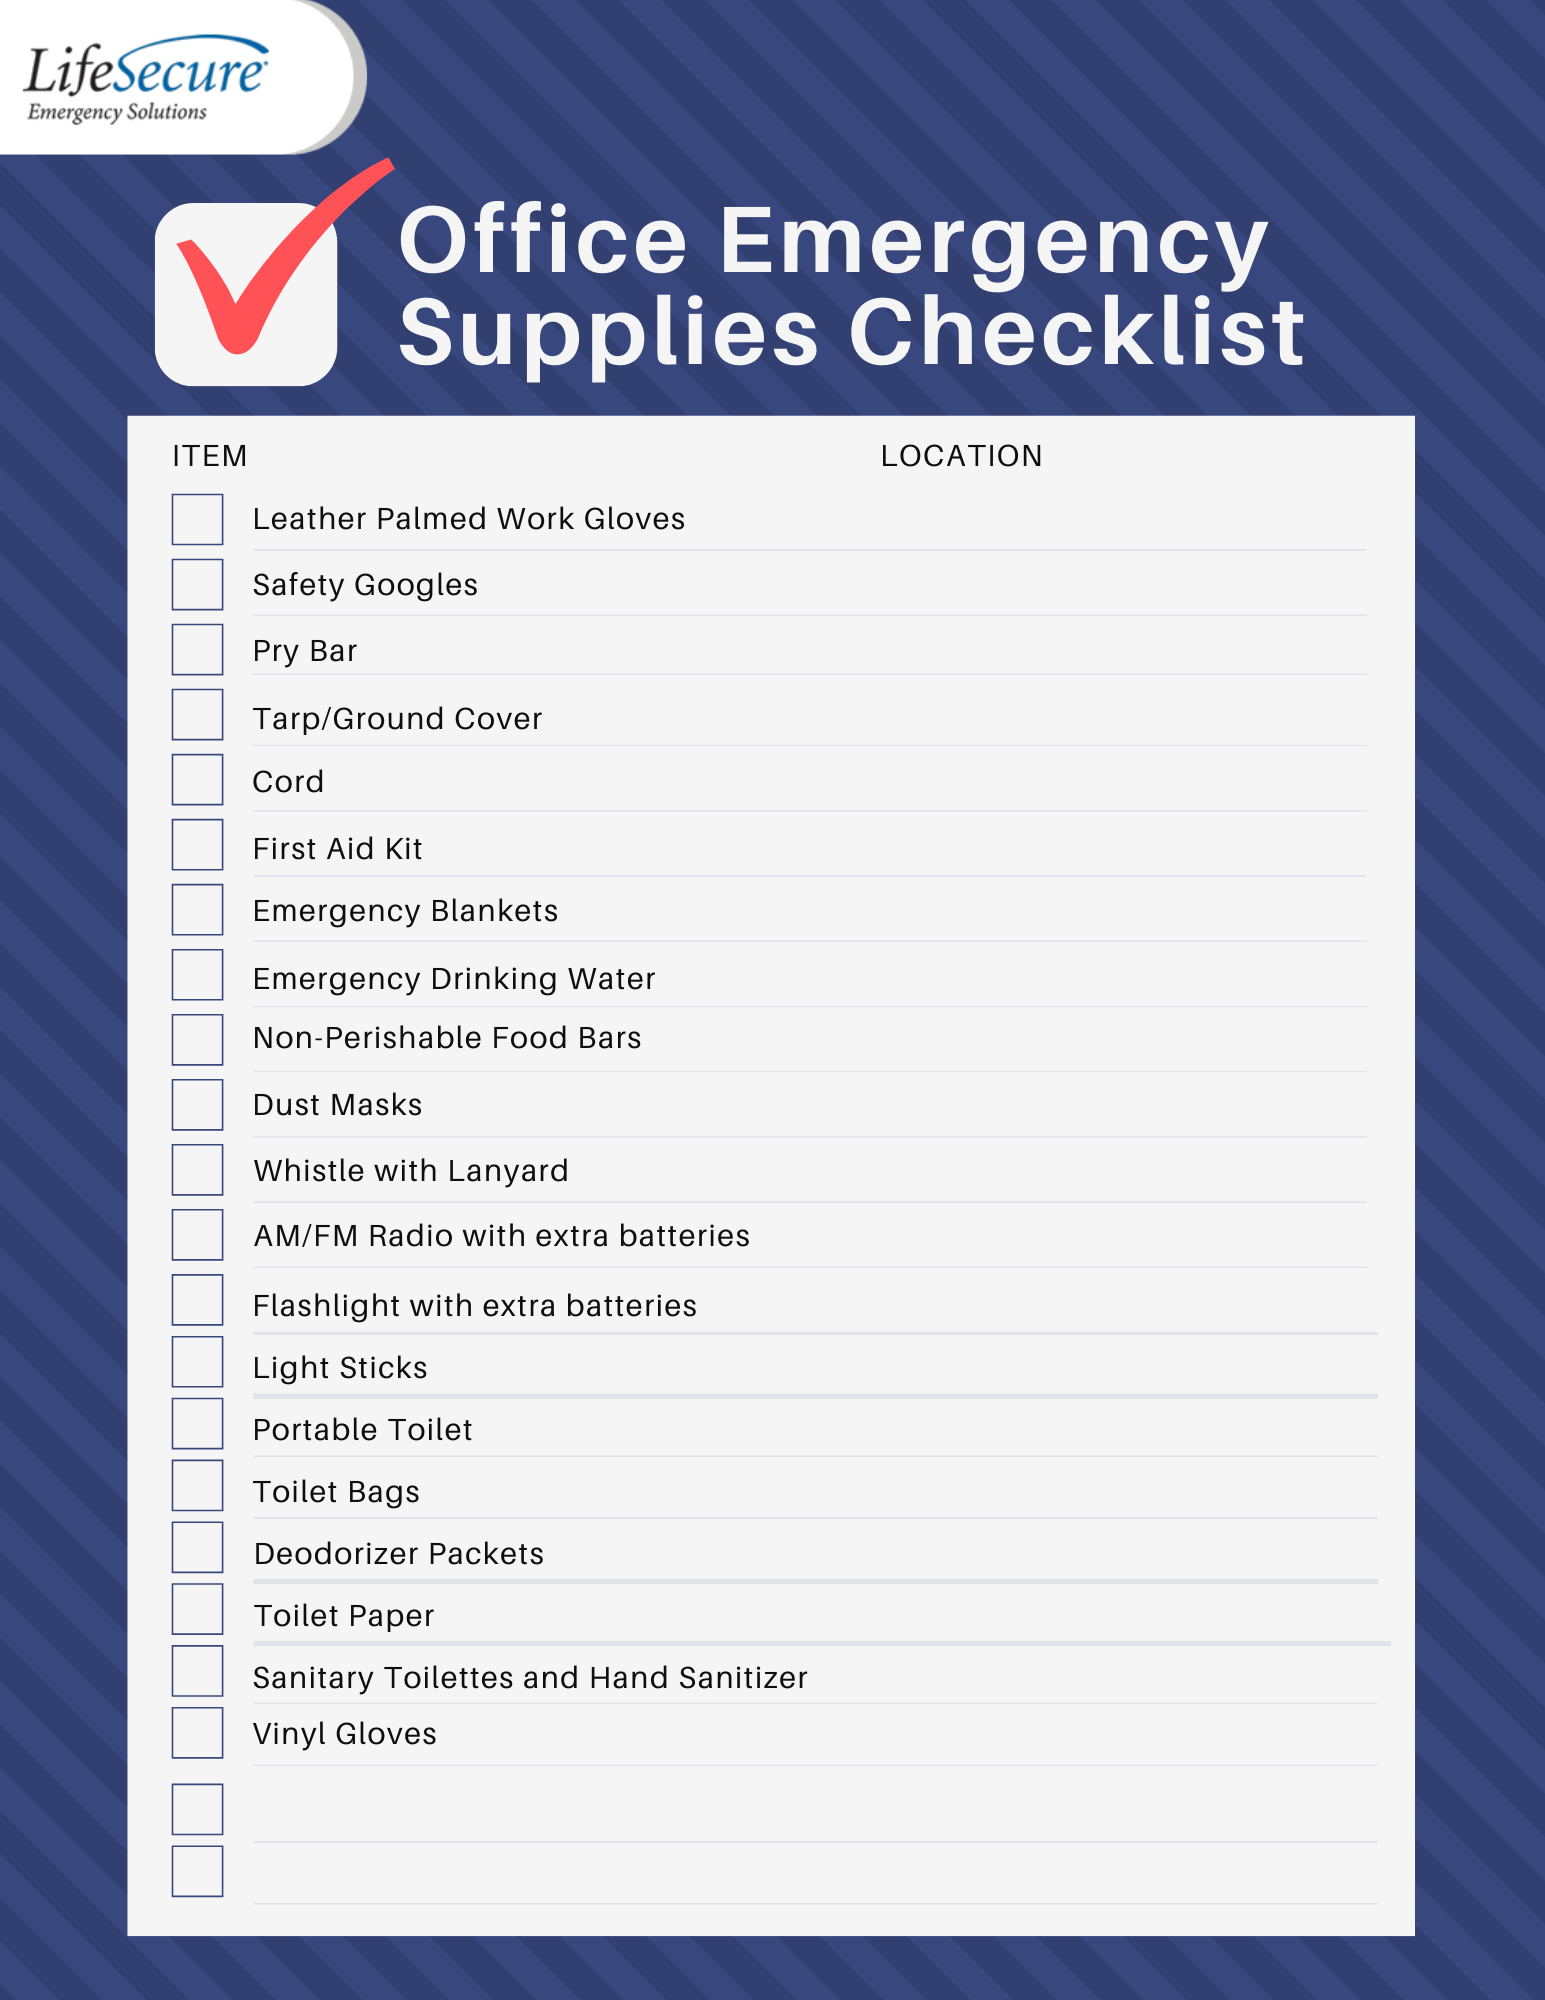 Office Emergency Supplies Checklist - LifeSecure